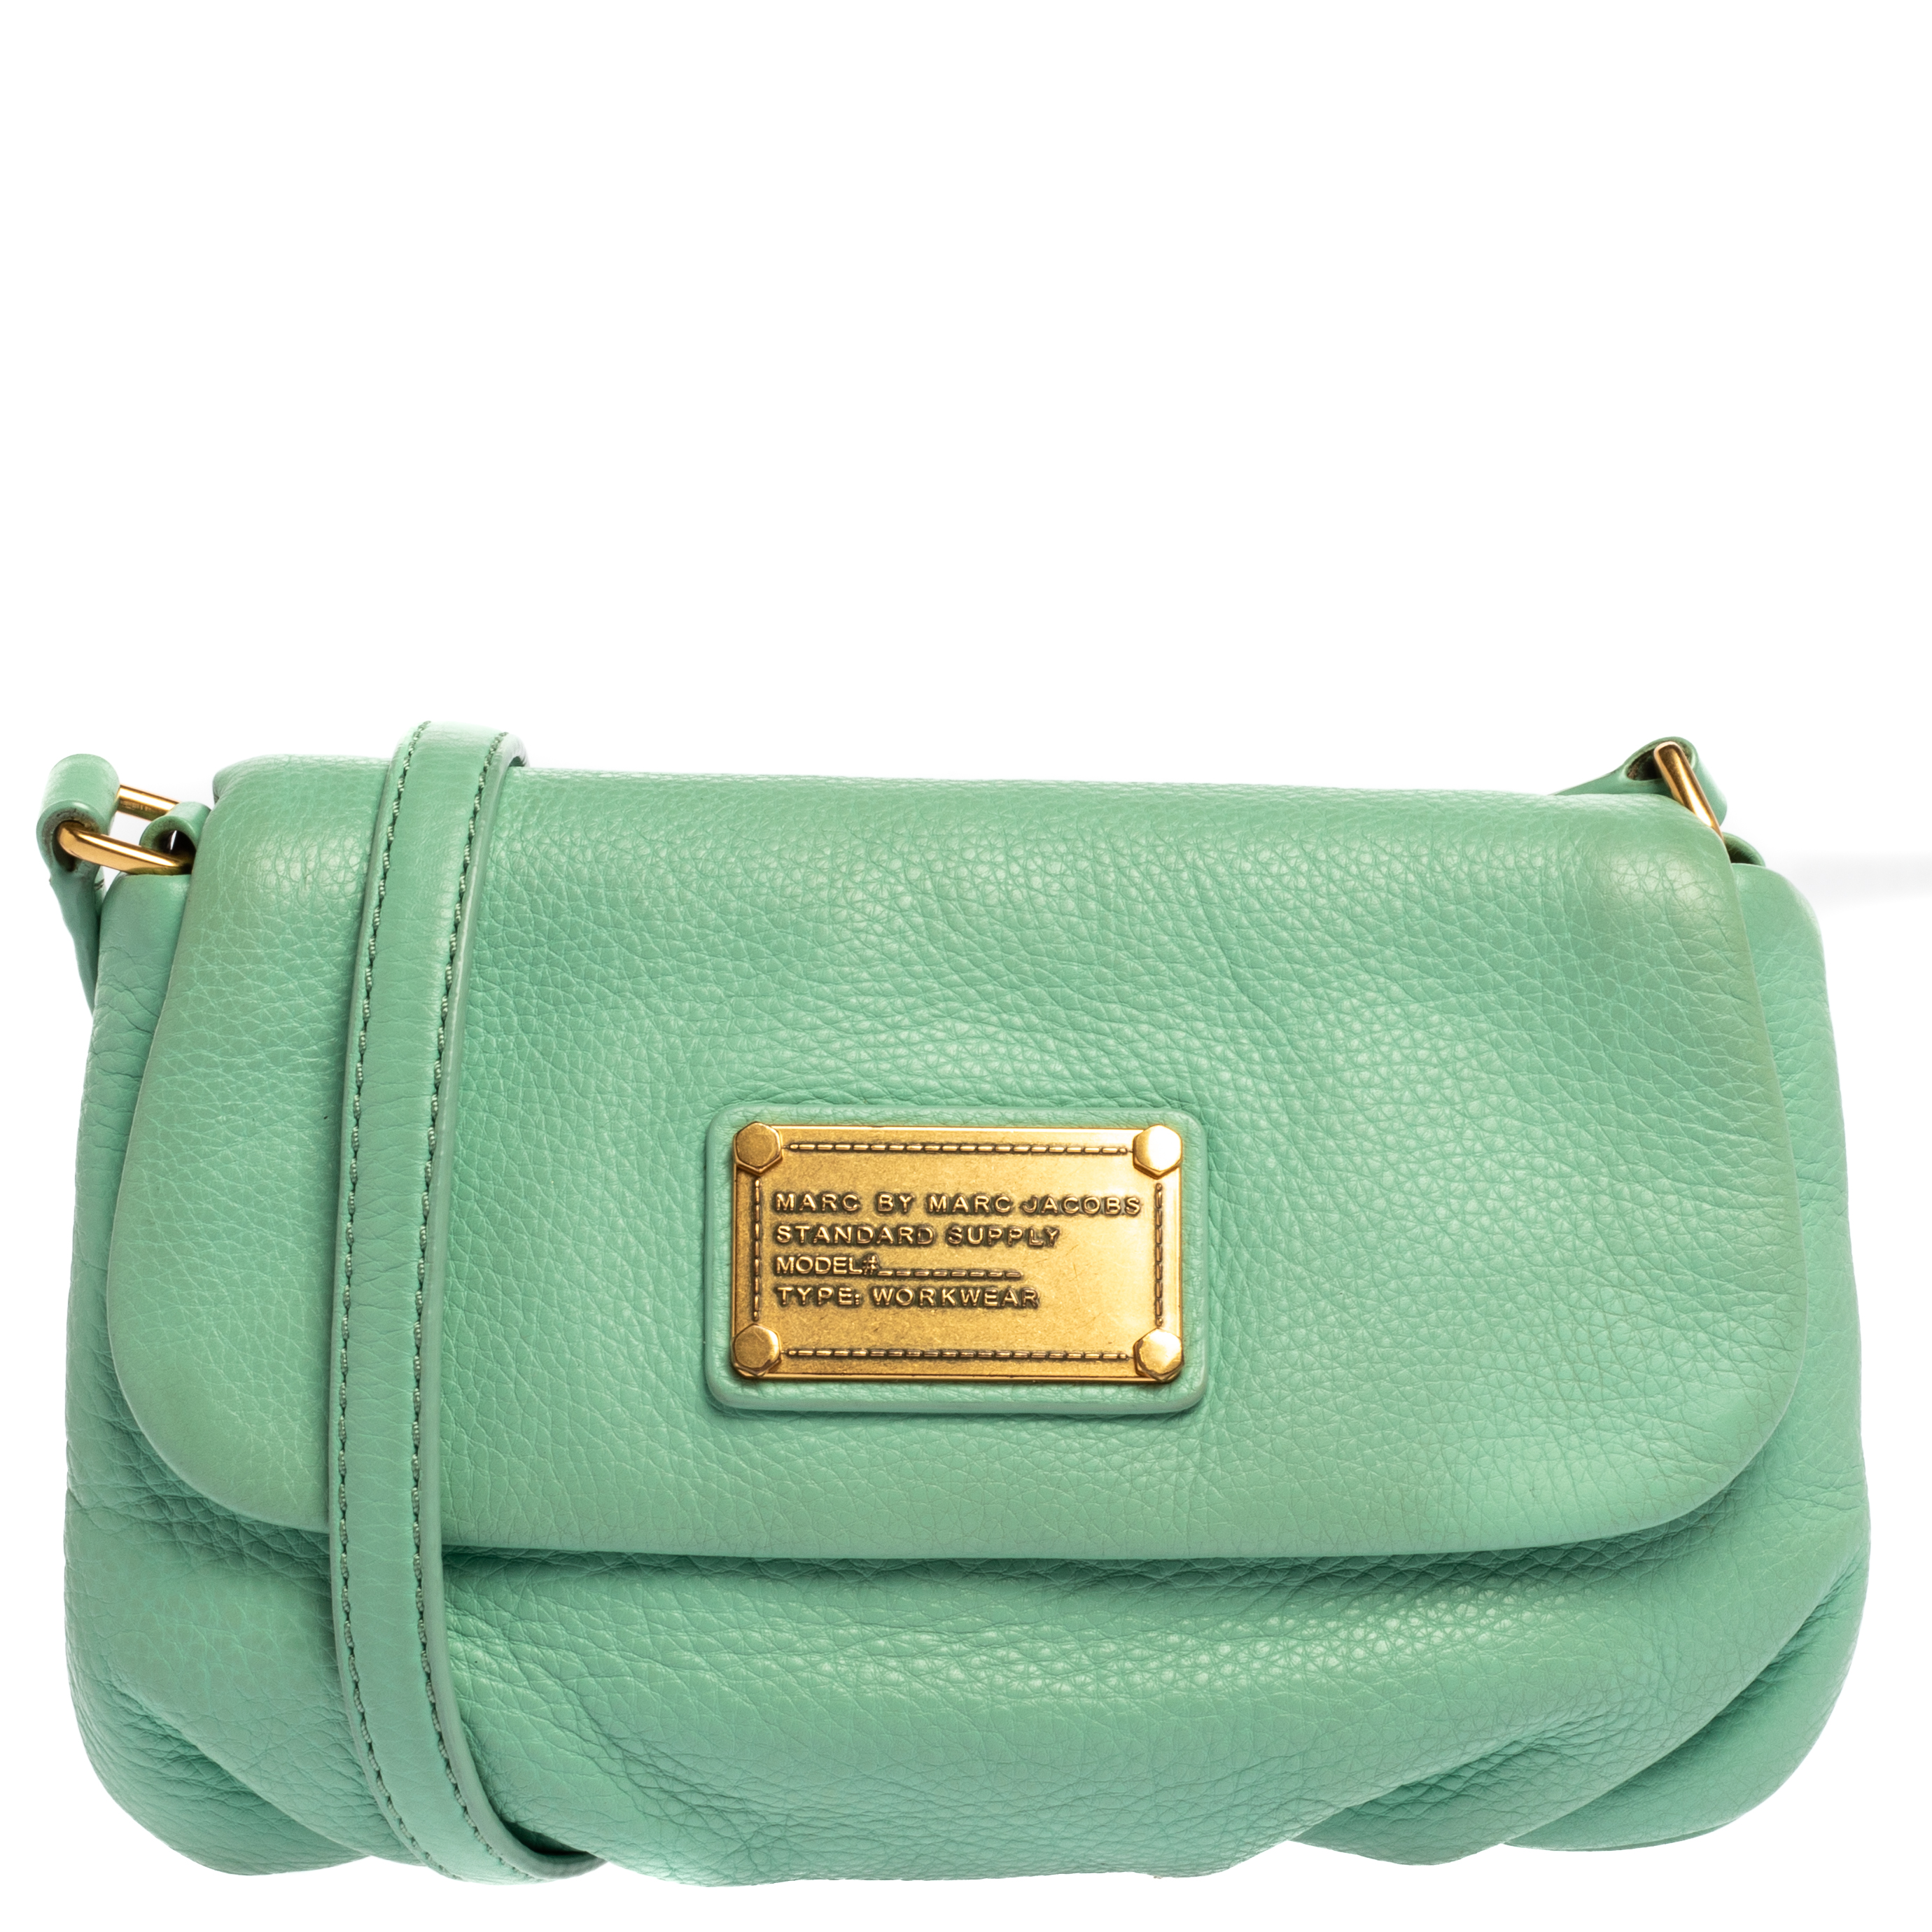 This luxurious and sturdy Classic Q Karlie bag by Marc by Marc Jacobs will surely meet up all your expectations. Crafted from green leather the bag features the logo plate on the front flap and a shoulder strap. The interior is fabric lined and comes with a zip pocket.